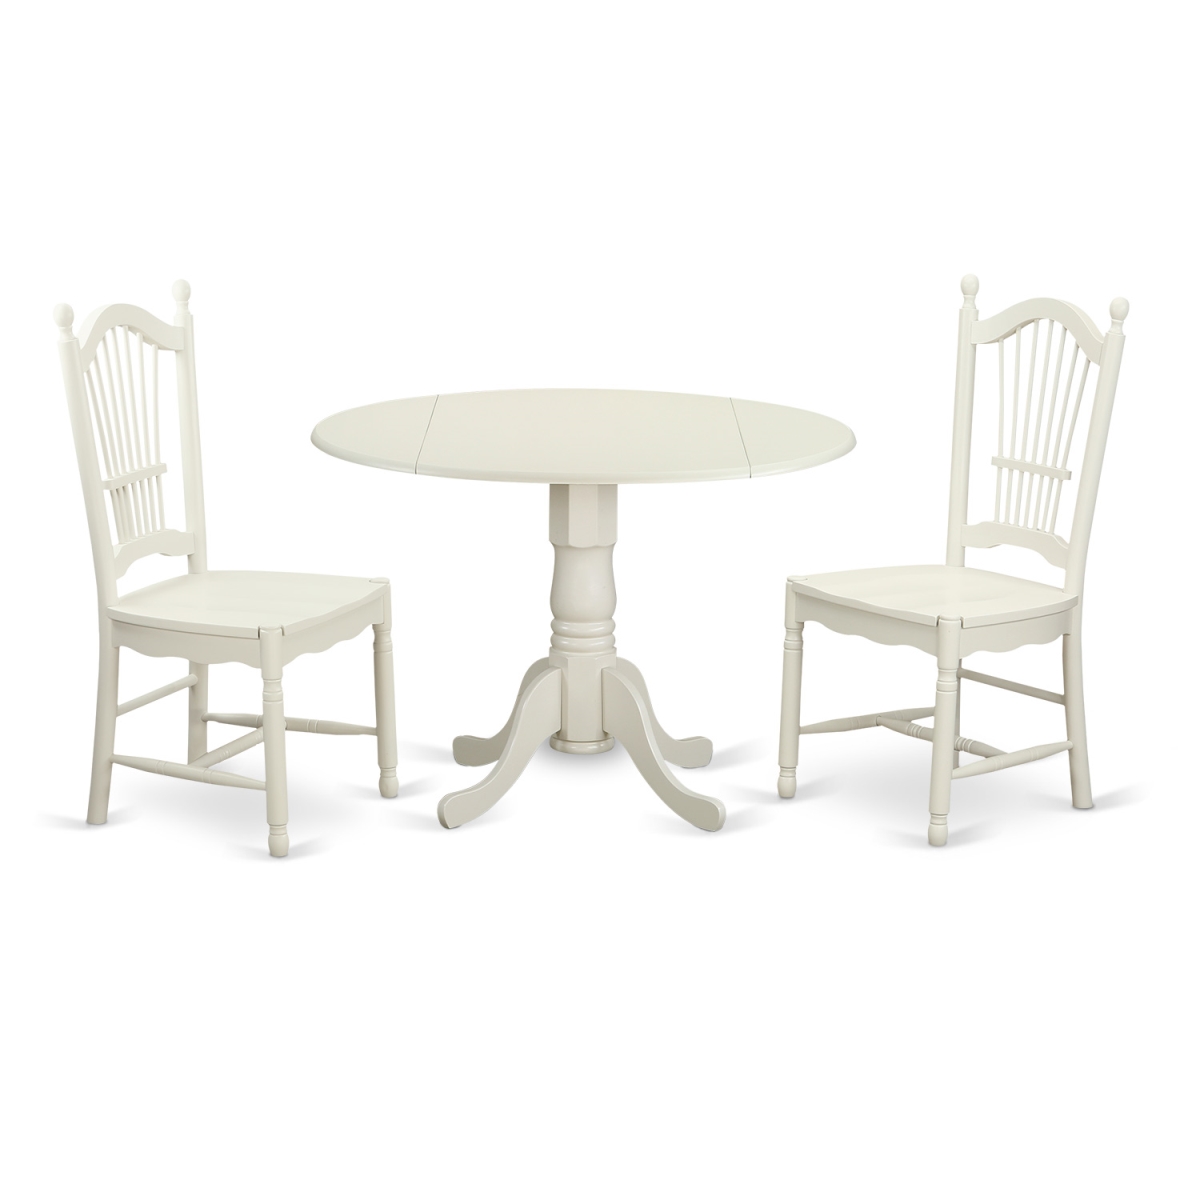 Picture of East West Furniture DLDO3-WHI-W Kitchen Dinette Set with 2 Table & 2 Chairs, Linen White - 3 Piece